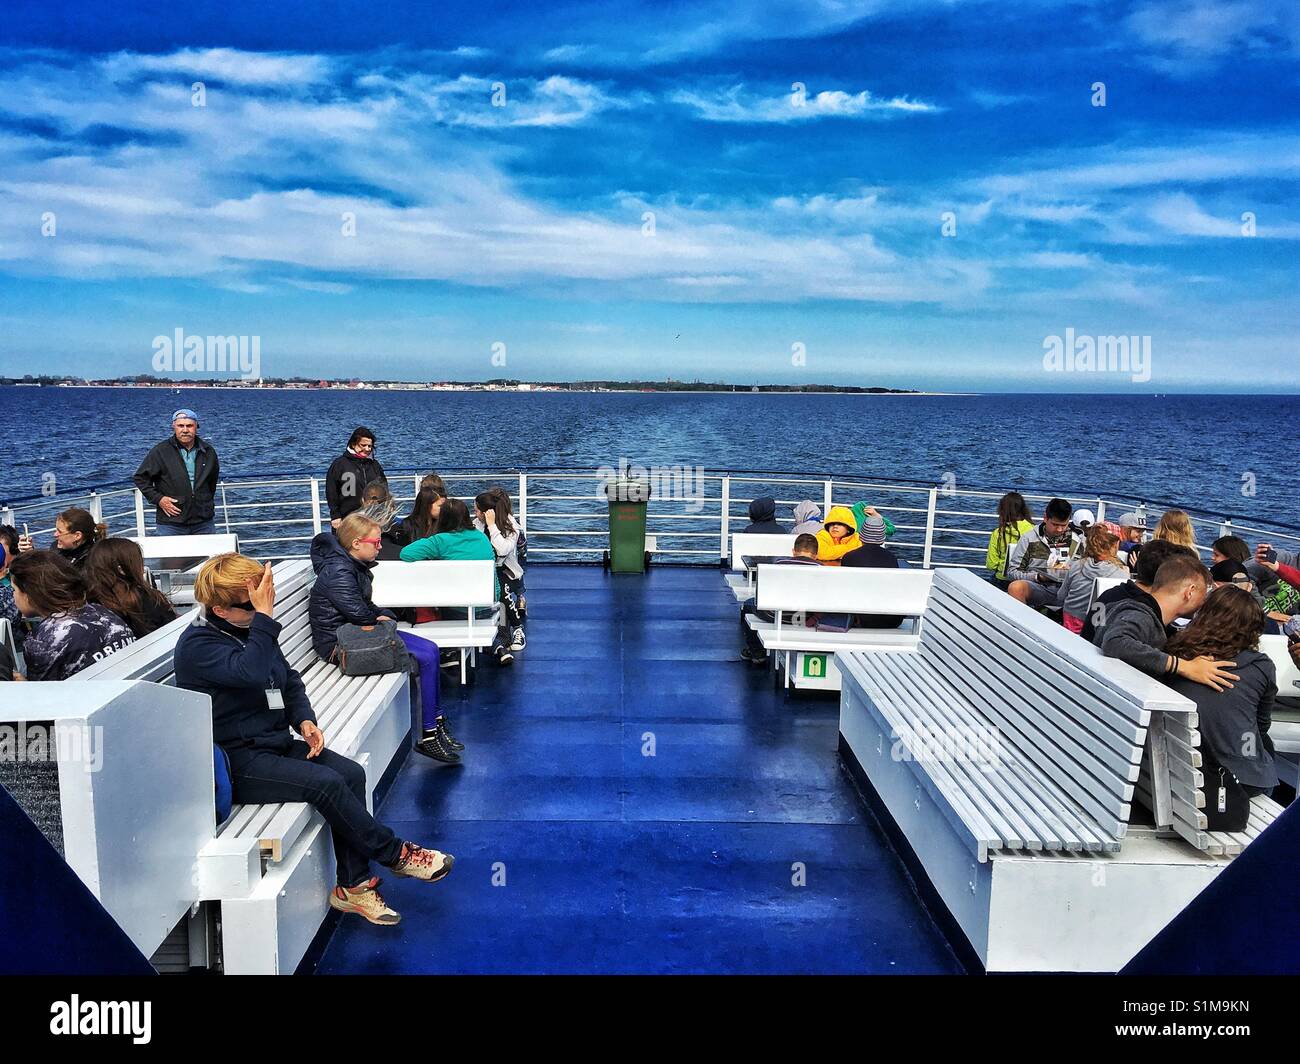 Passengers on a ferry boat connected Hel village on a Hel Peninsula and Gdynia city in Poland Stock Photo